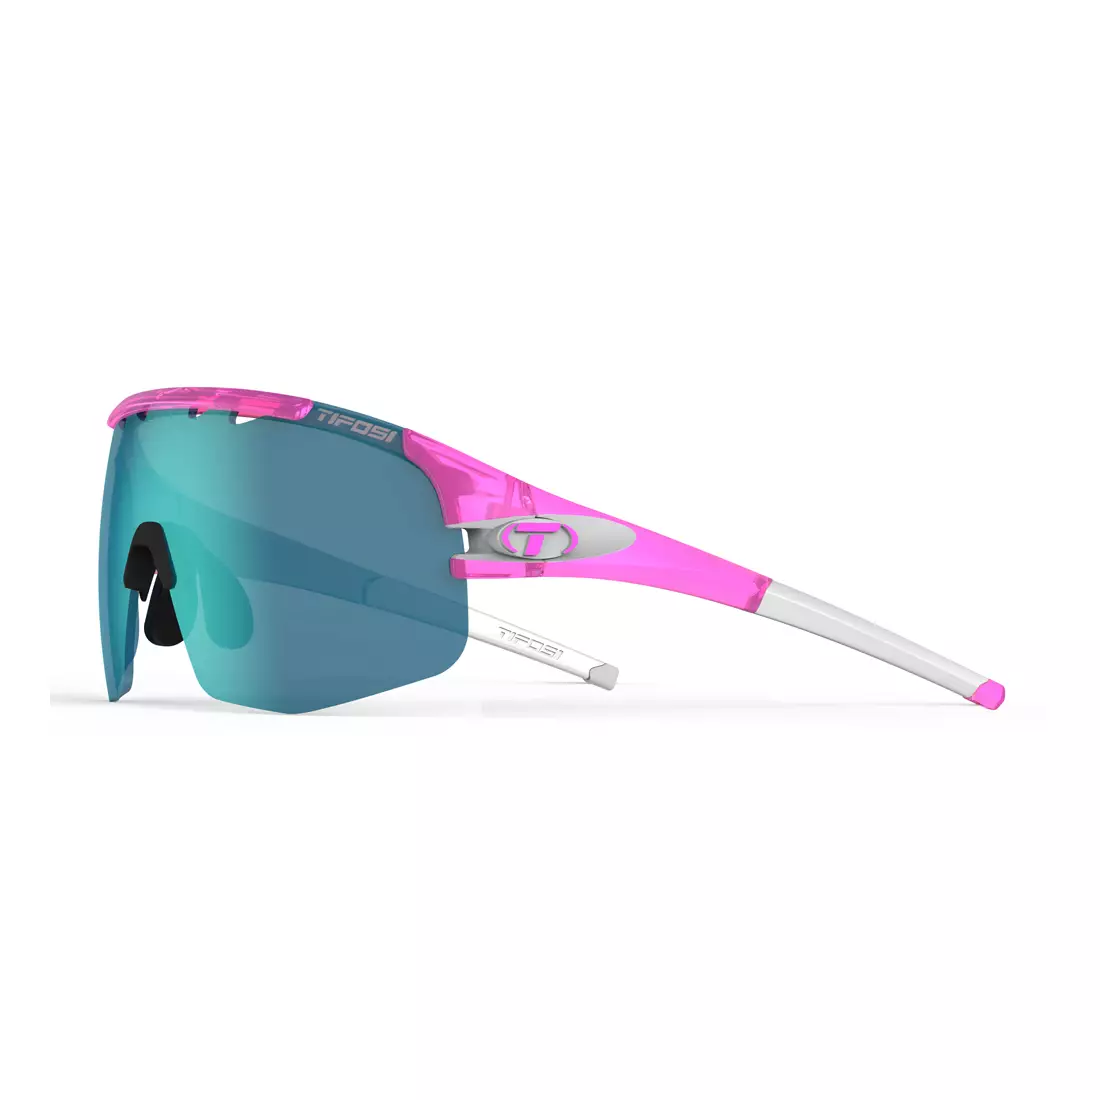 TIFOSI glasses with interchangeable lenses SLEDGE LITE CLARION (Clarion Blue, AC Red, Clear) crystal pink TFI-1670104522